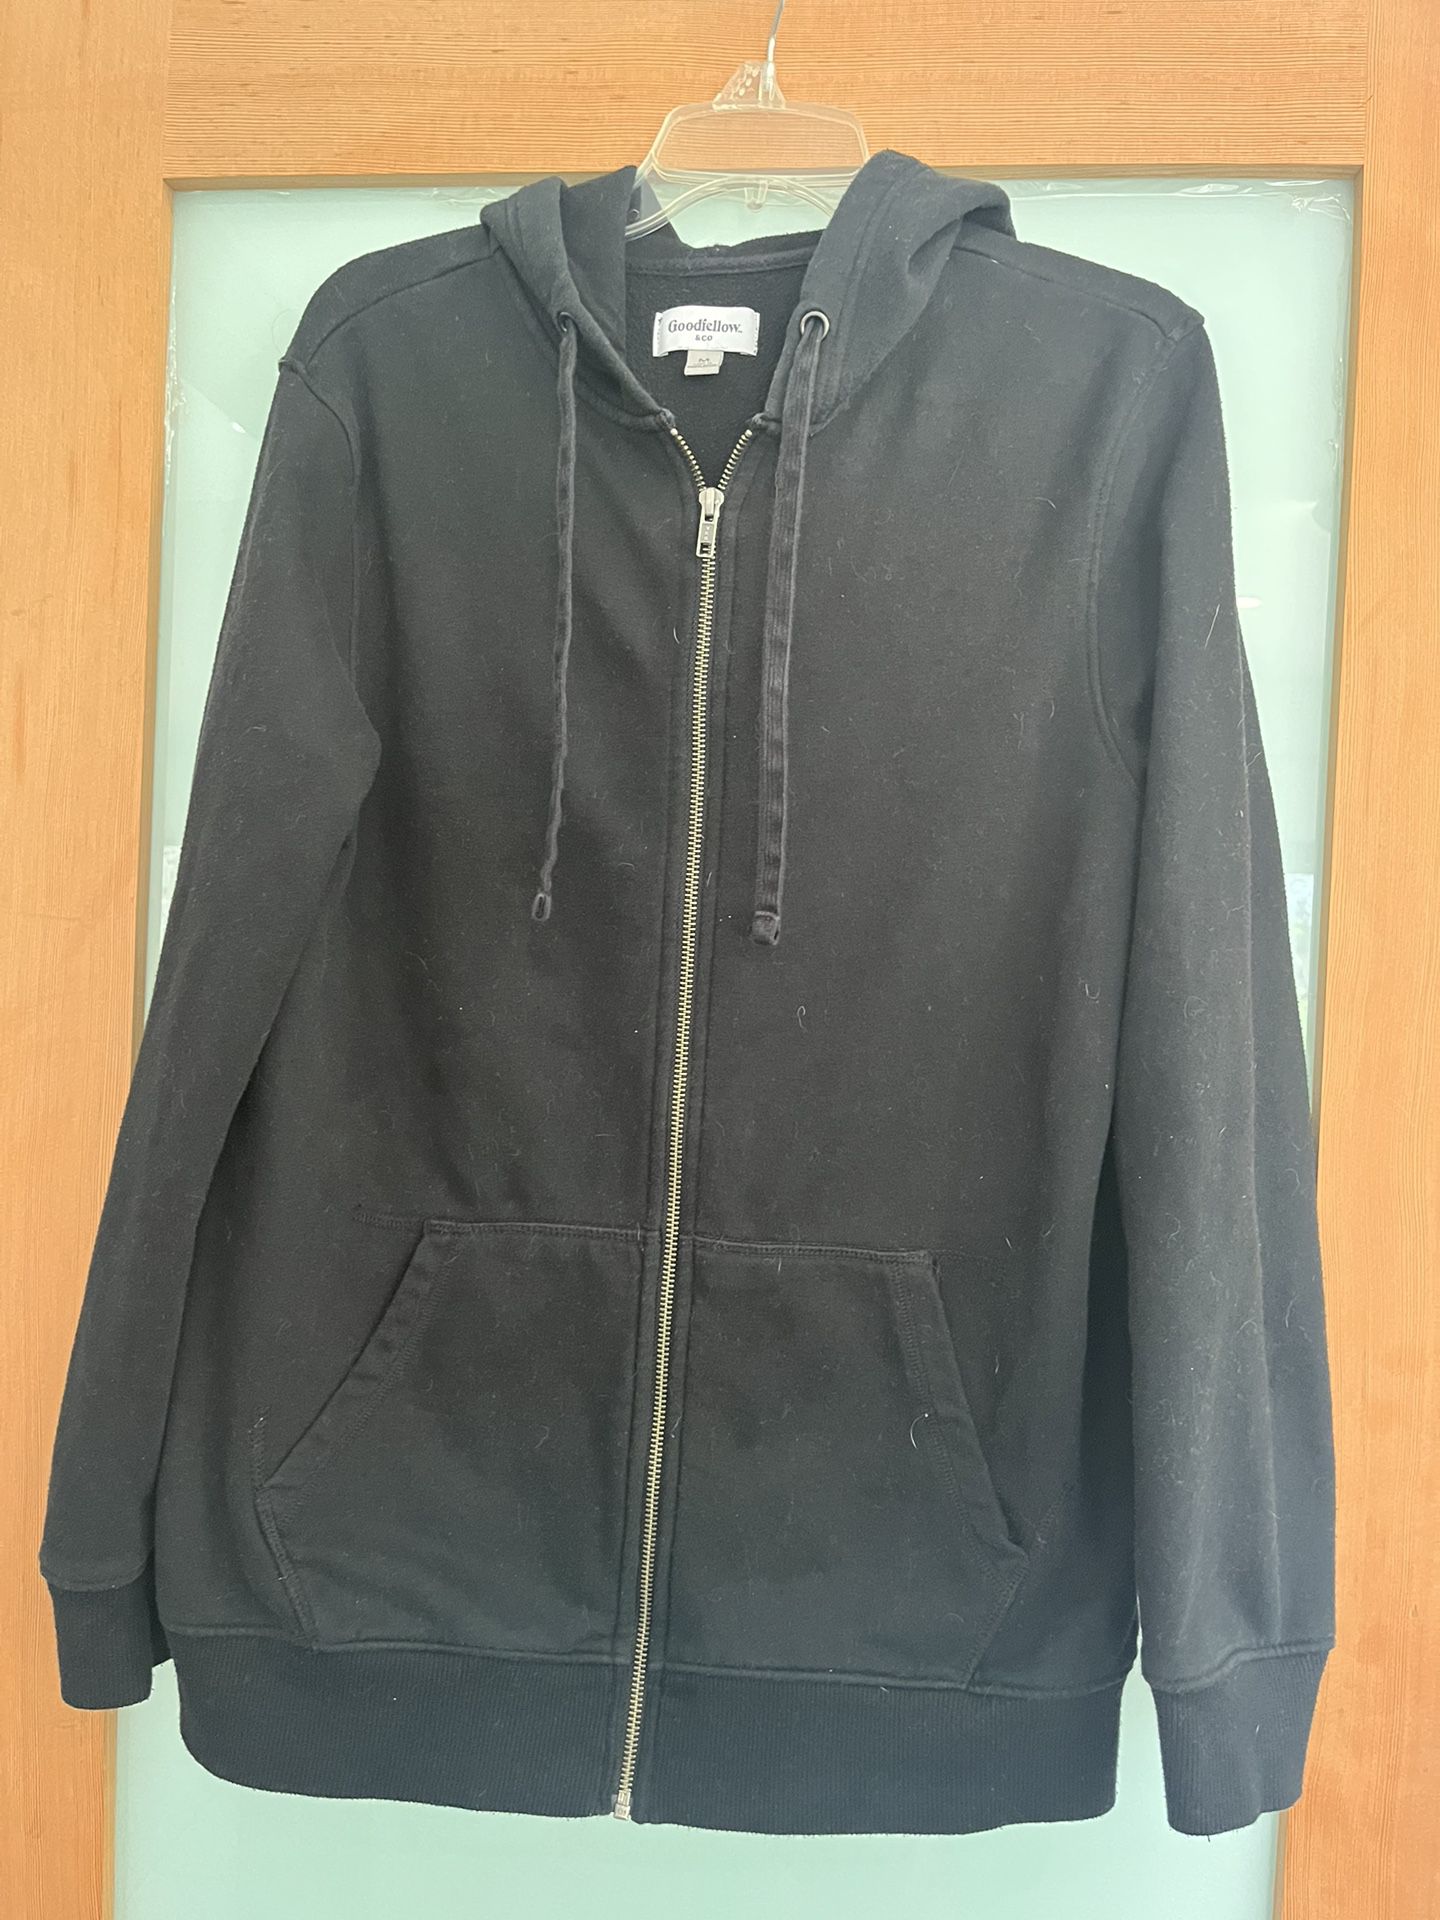 Goodfellow & Co * Black hoodie sweatshirt* size M *will give a lint wash before shipping;-)